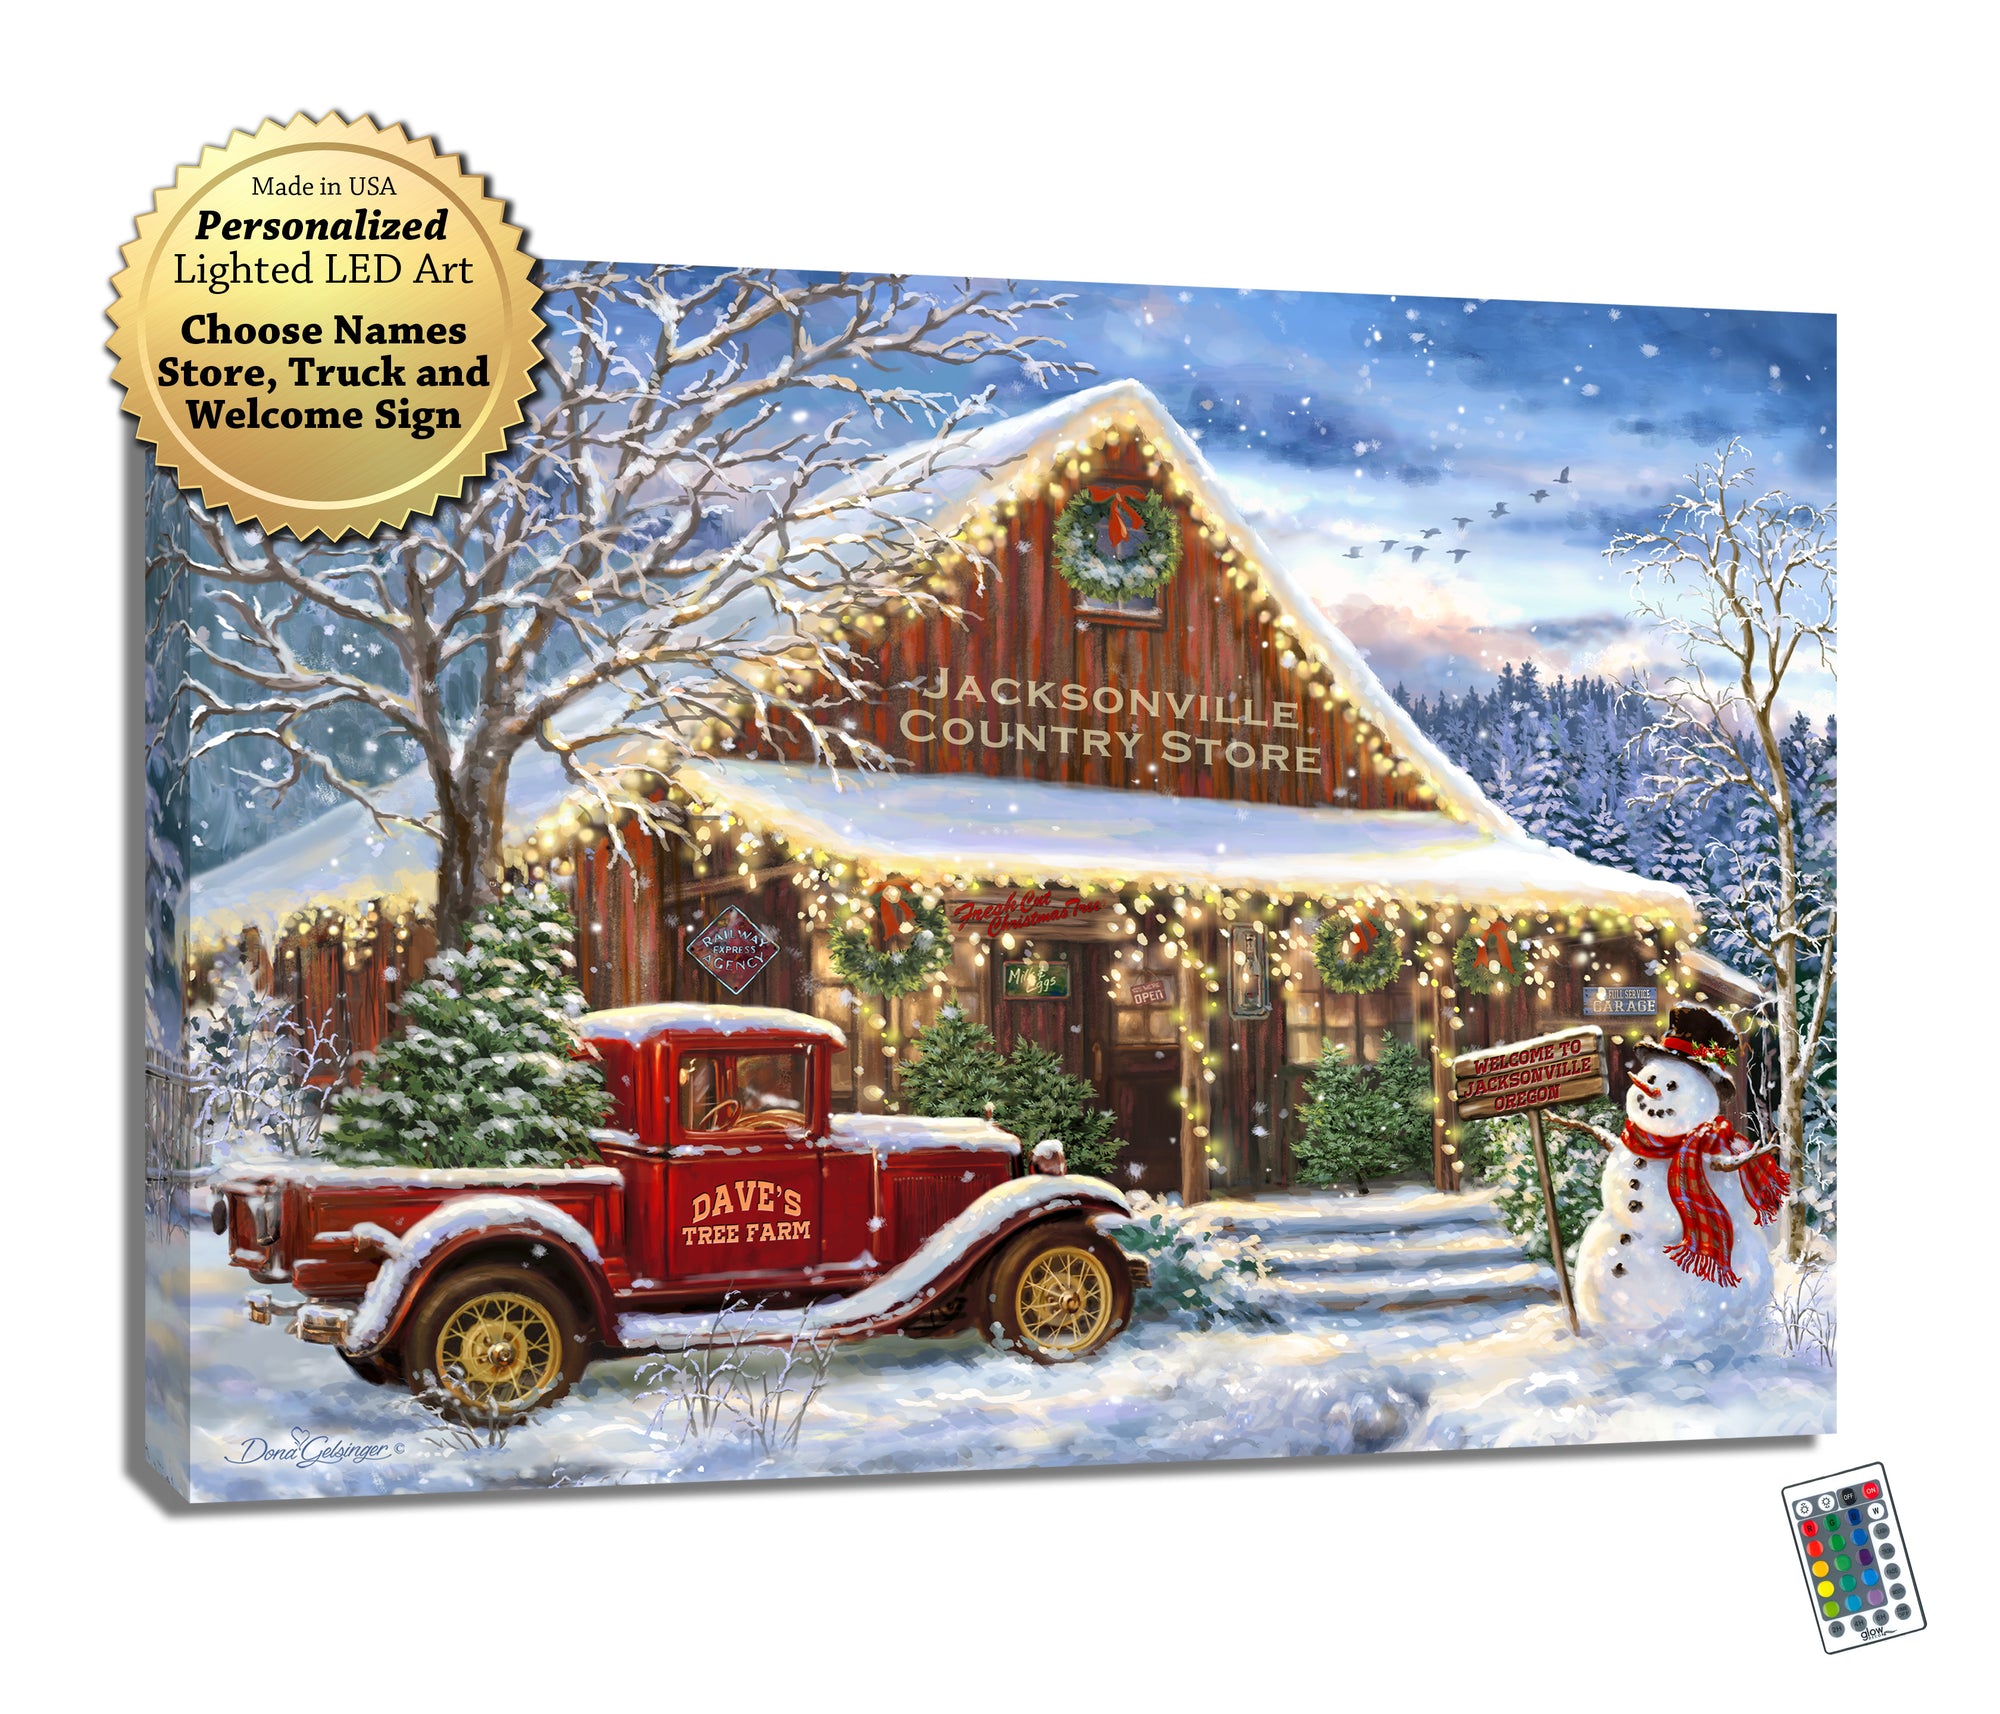 Featuring a charming scene of an old red truck with a fresh cut Christmas tree in its bed, accompanied by a jolly snowman wearing a scarf and top hat, this wall art captures the magic of the holiday season in a truly unforgettable way.  With a snow-covered wooden country store in the background adorned with wreaths and Christmas lights.